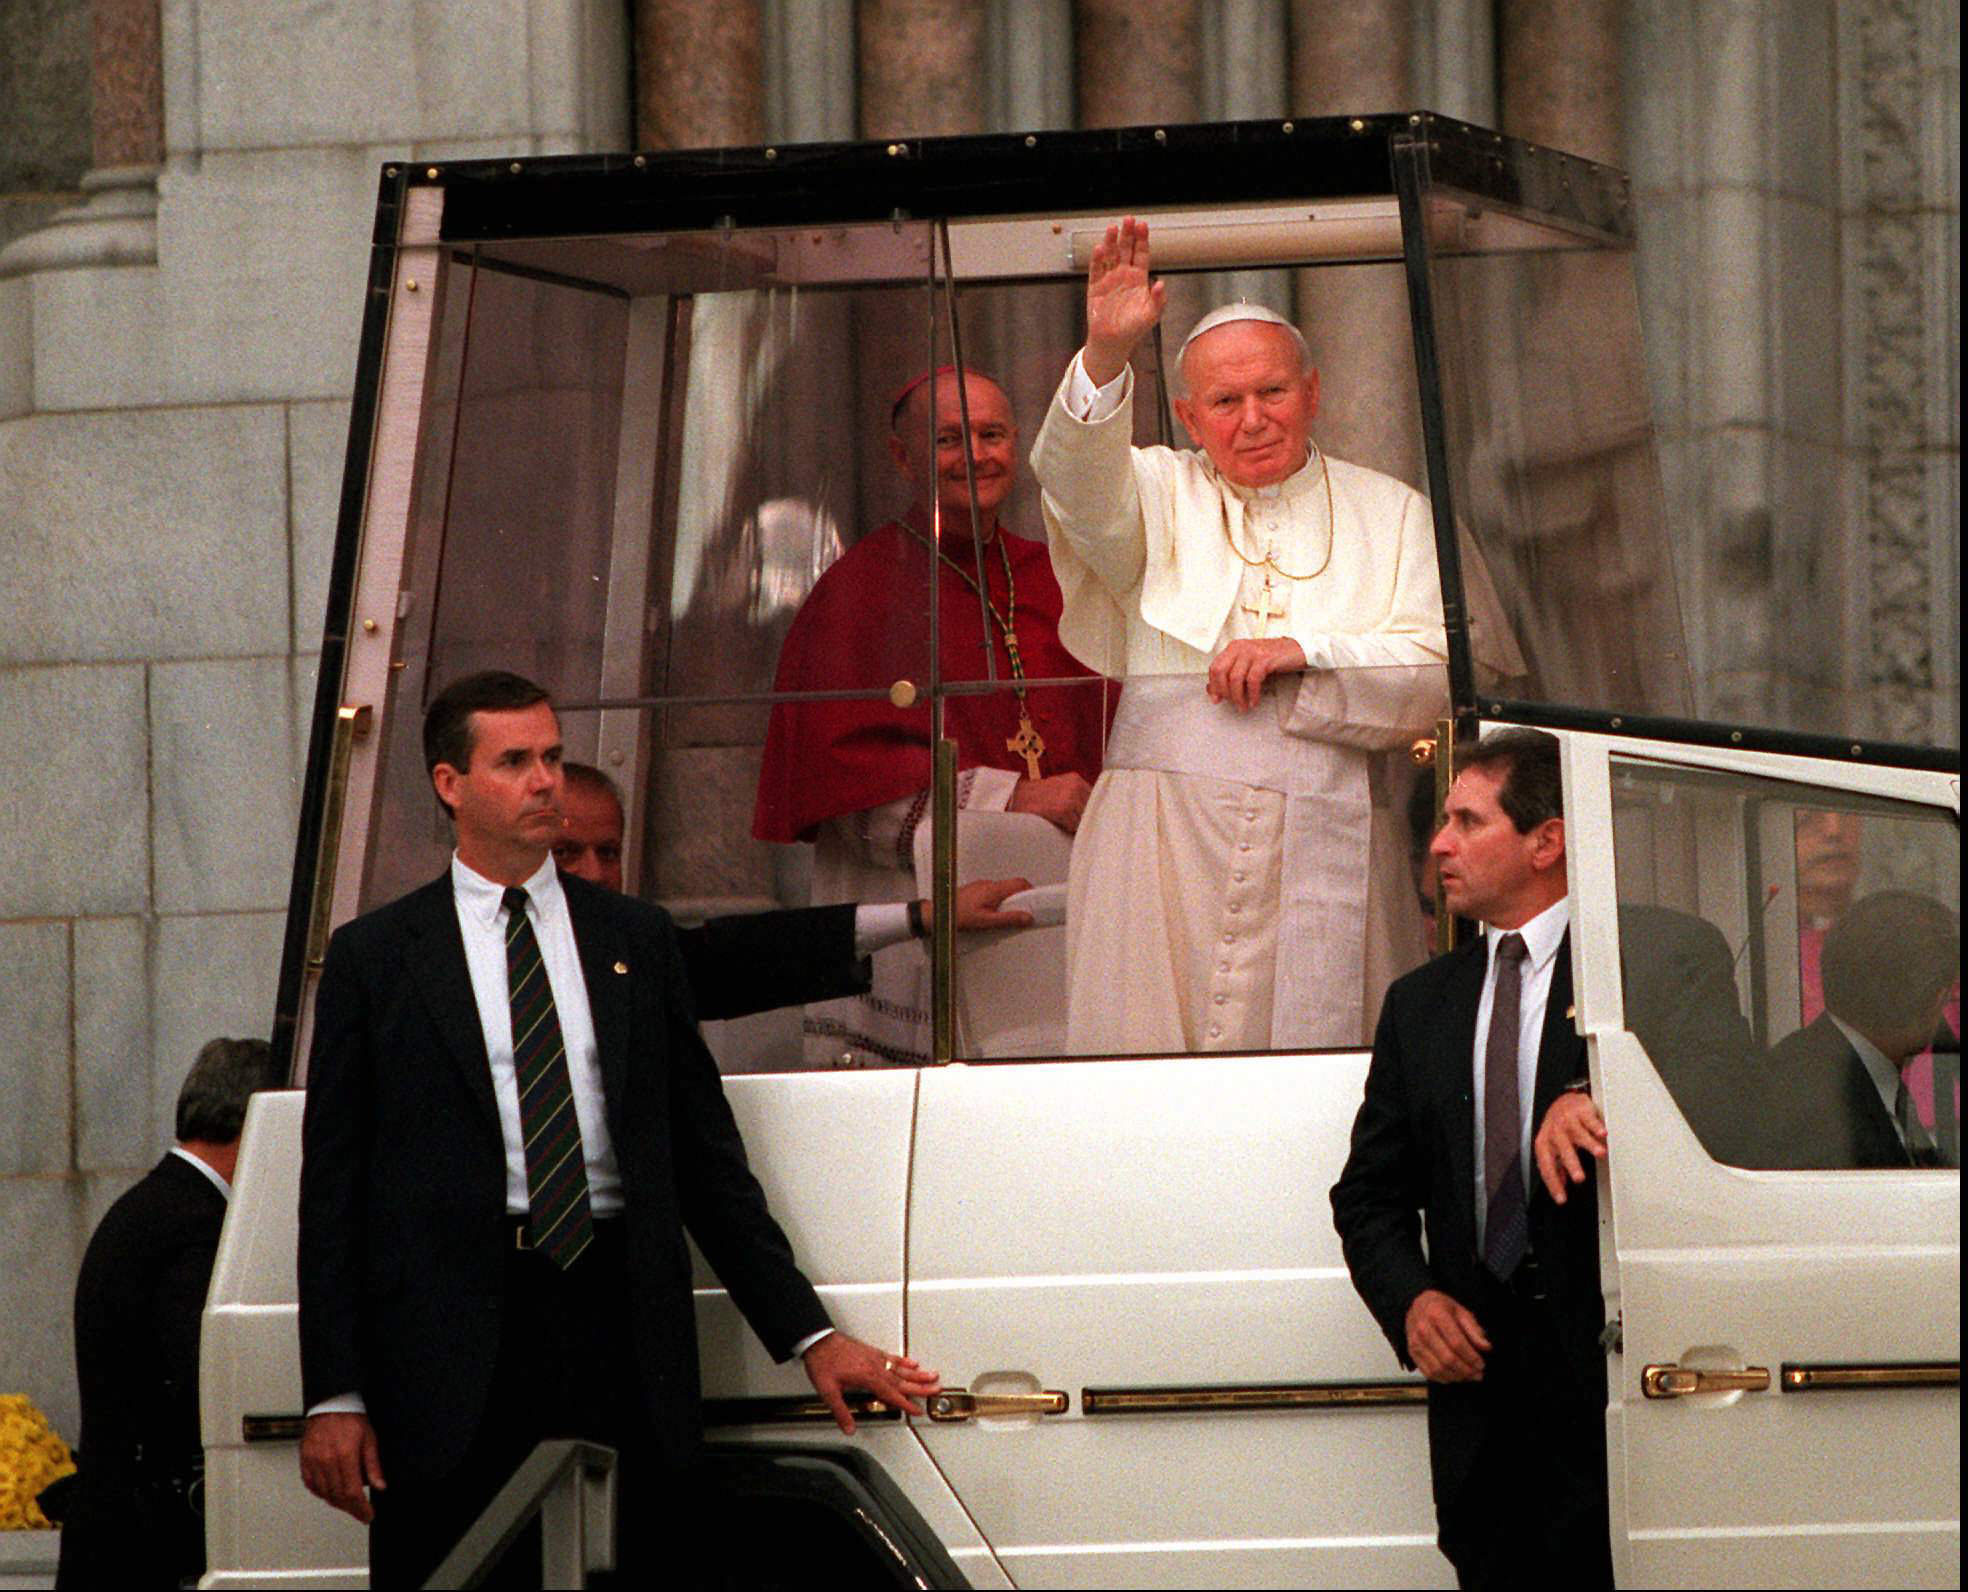 Pope John Paul II waves from the popemobile, in the company of 
Archbishop Theodore McCarrick, before entering Sacred Heart Cathedral for a service during a visit to Newark, New Jersey, on Oct. 4, 1995. Photo by Jerry McCrea/Newark Star-Ledger